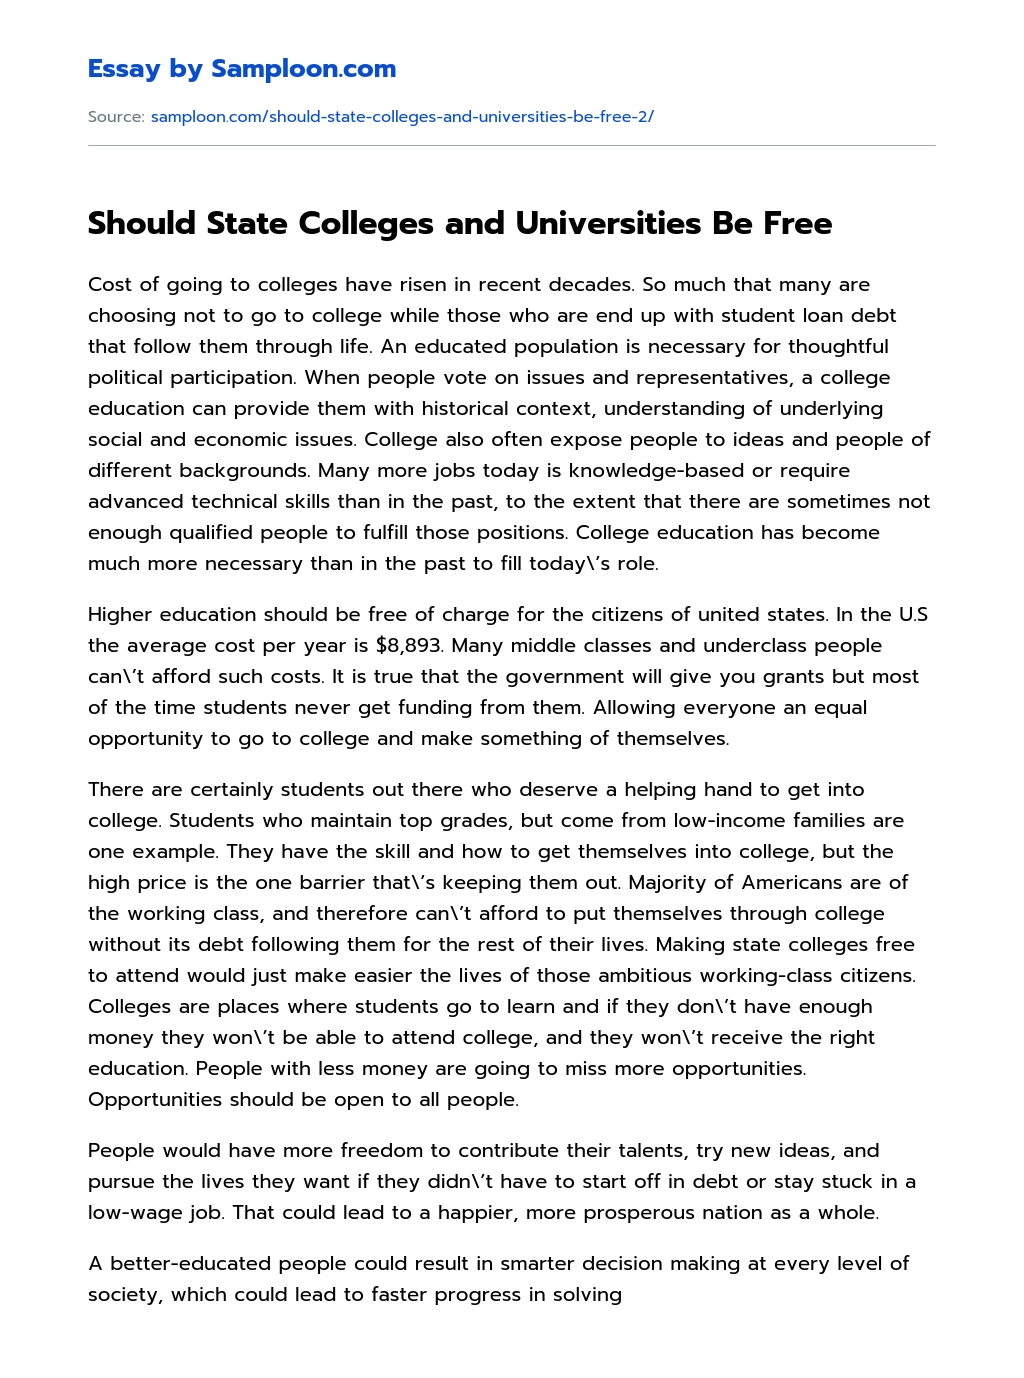 Should State Colleges and Universities Be Free essay